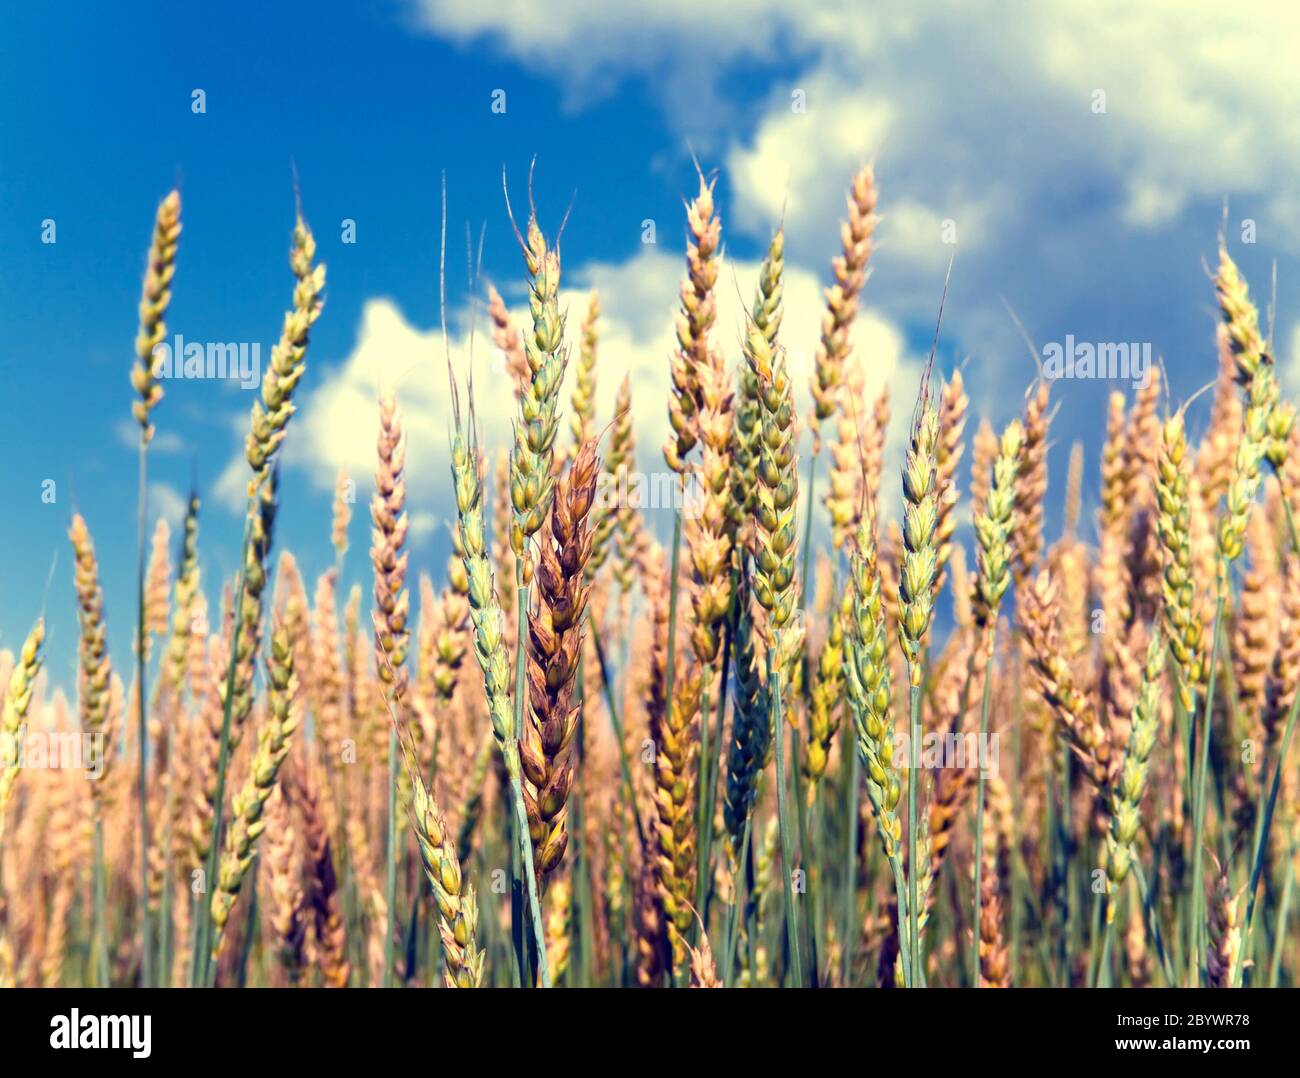 Ears of wheat on sky background, Stock Photo